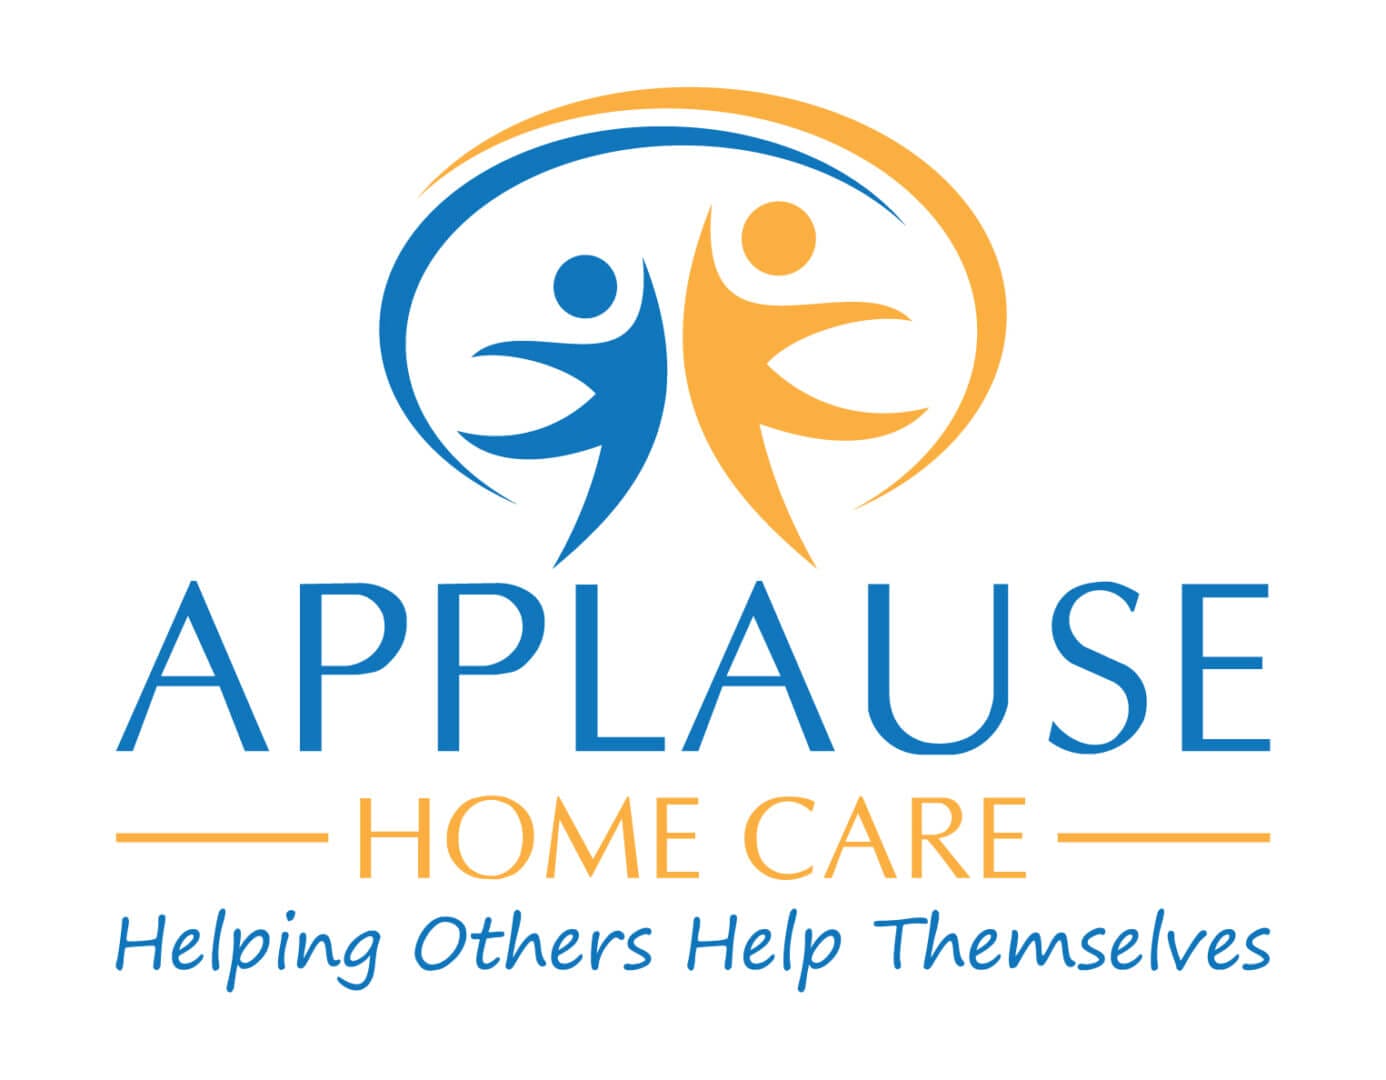 Applause Home Care